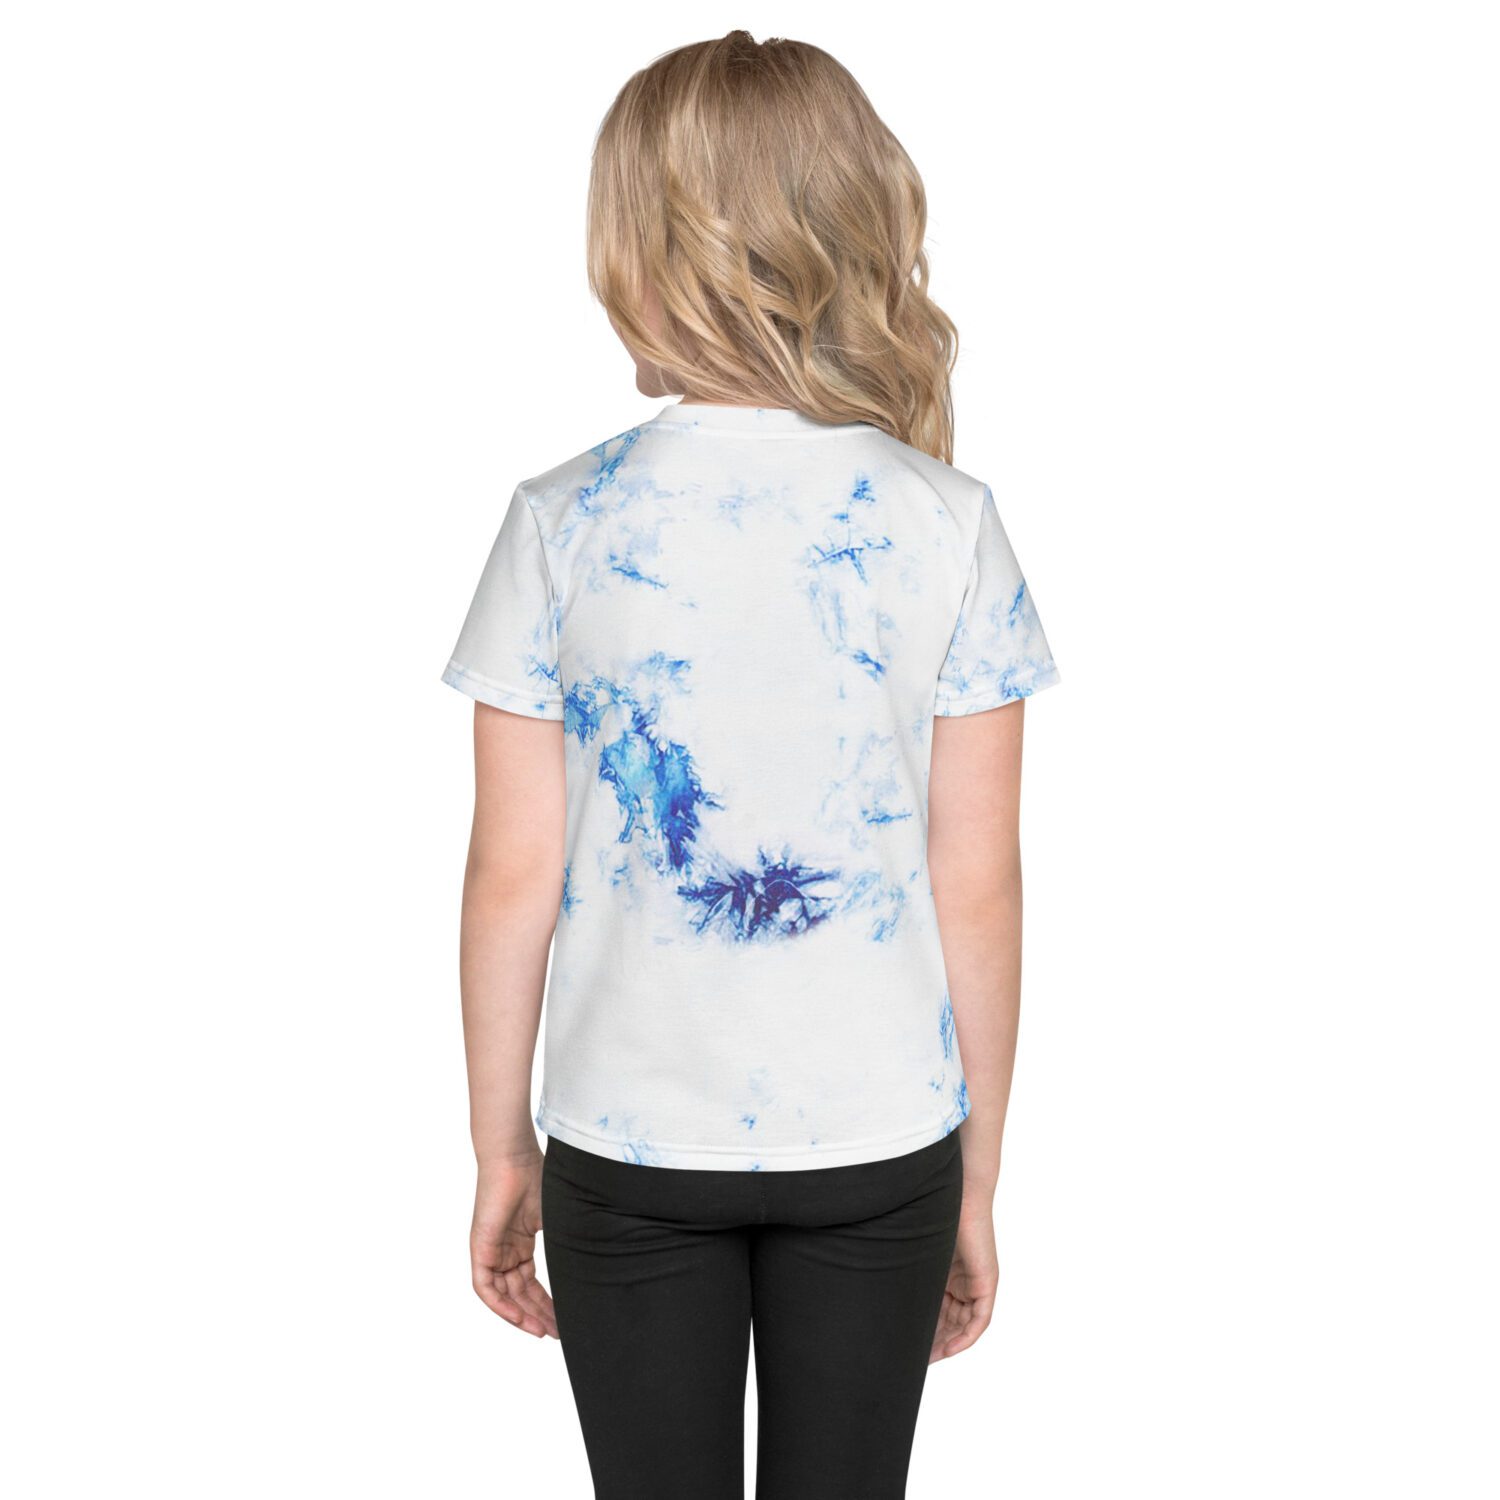 T-shirt with crew neck in vibrant sublimated white and blue tie-dye print with a fit that allows the kiddos to participate in all of their favorite activities and be comfy the whole time. The ultimate kid’s tee!